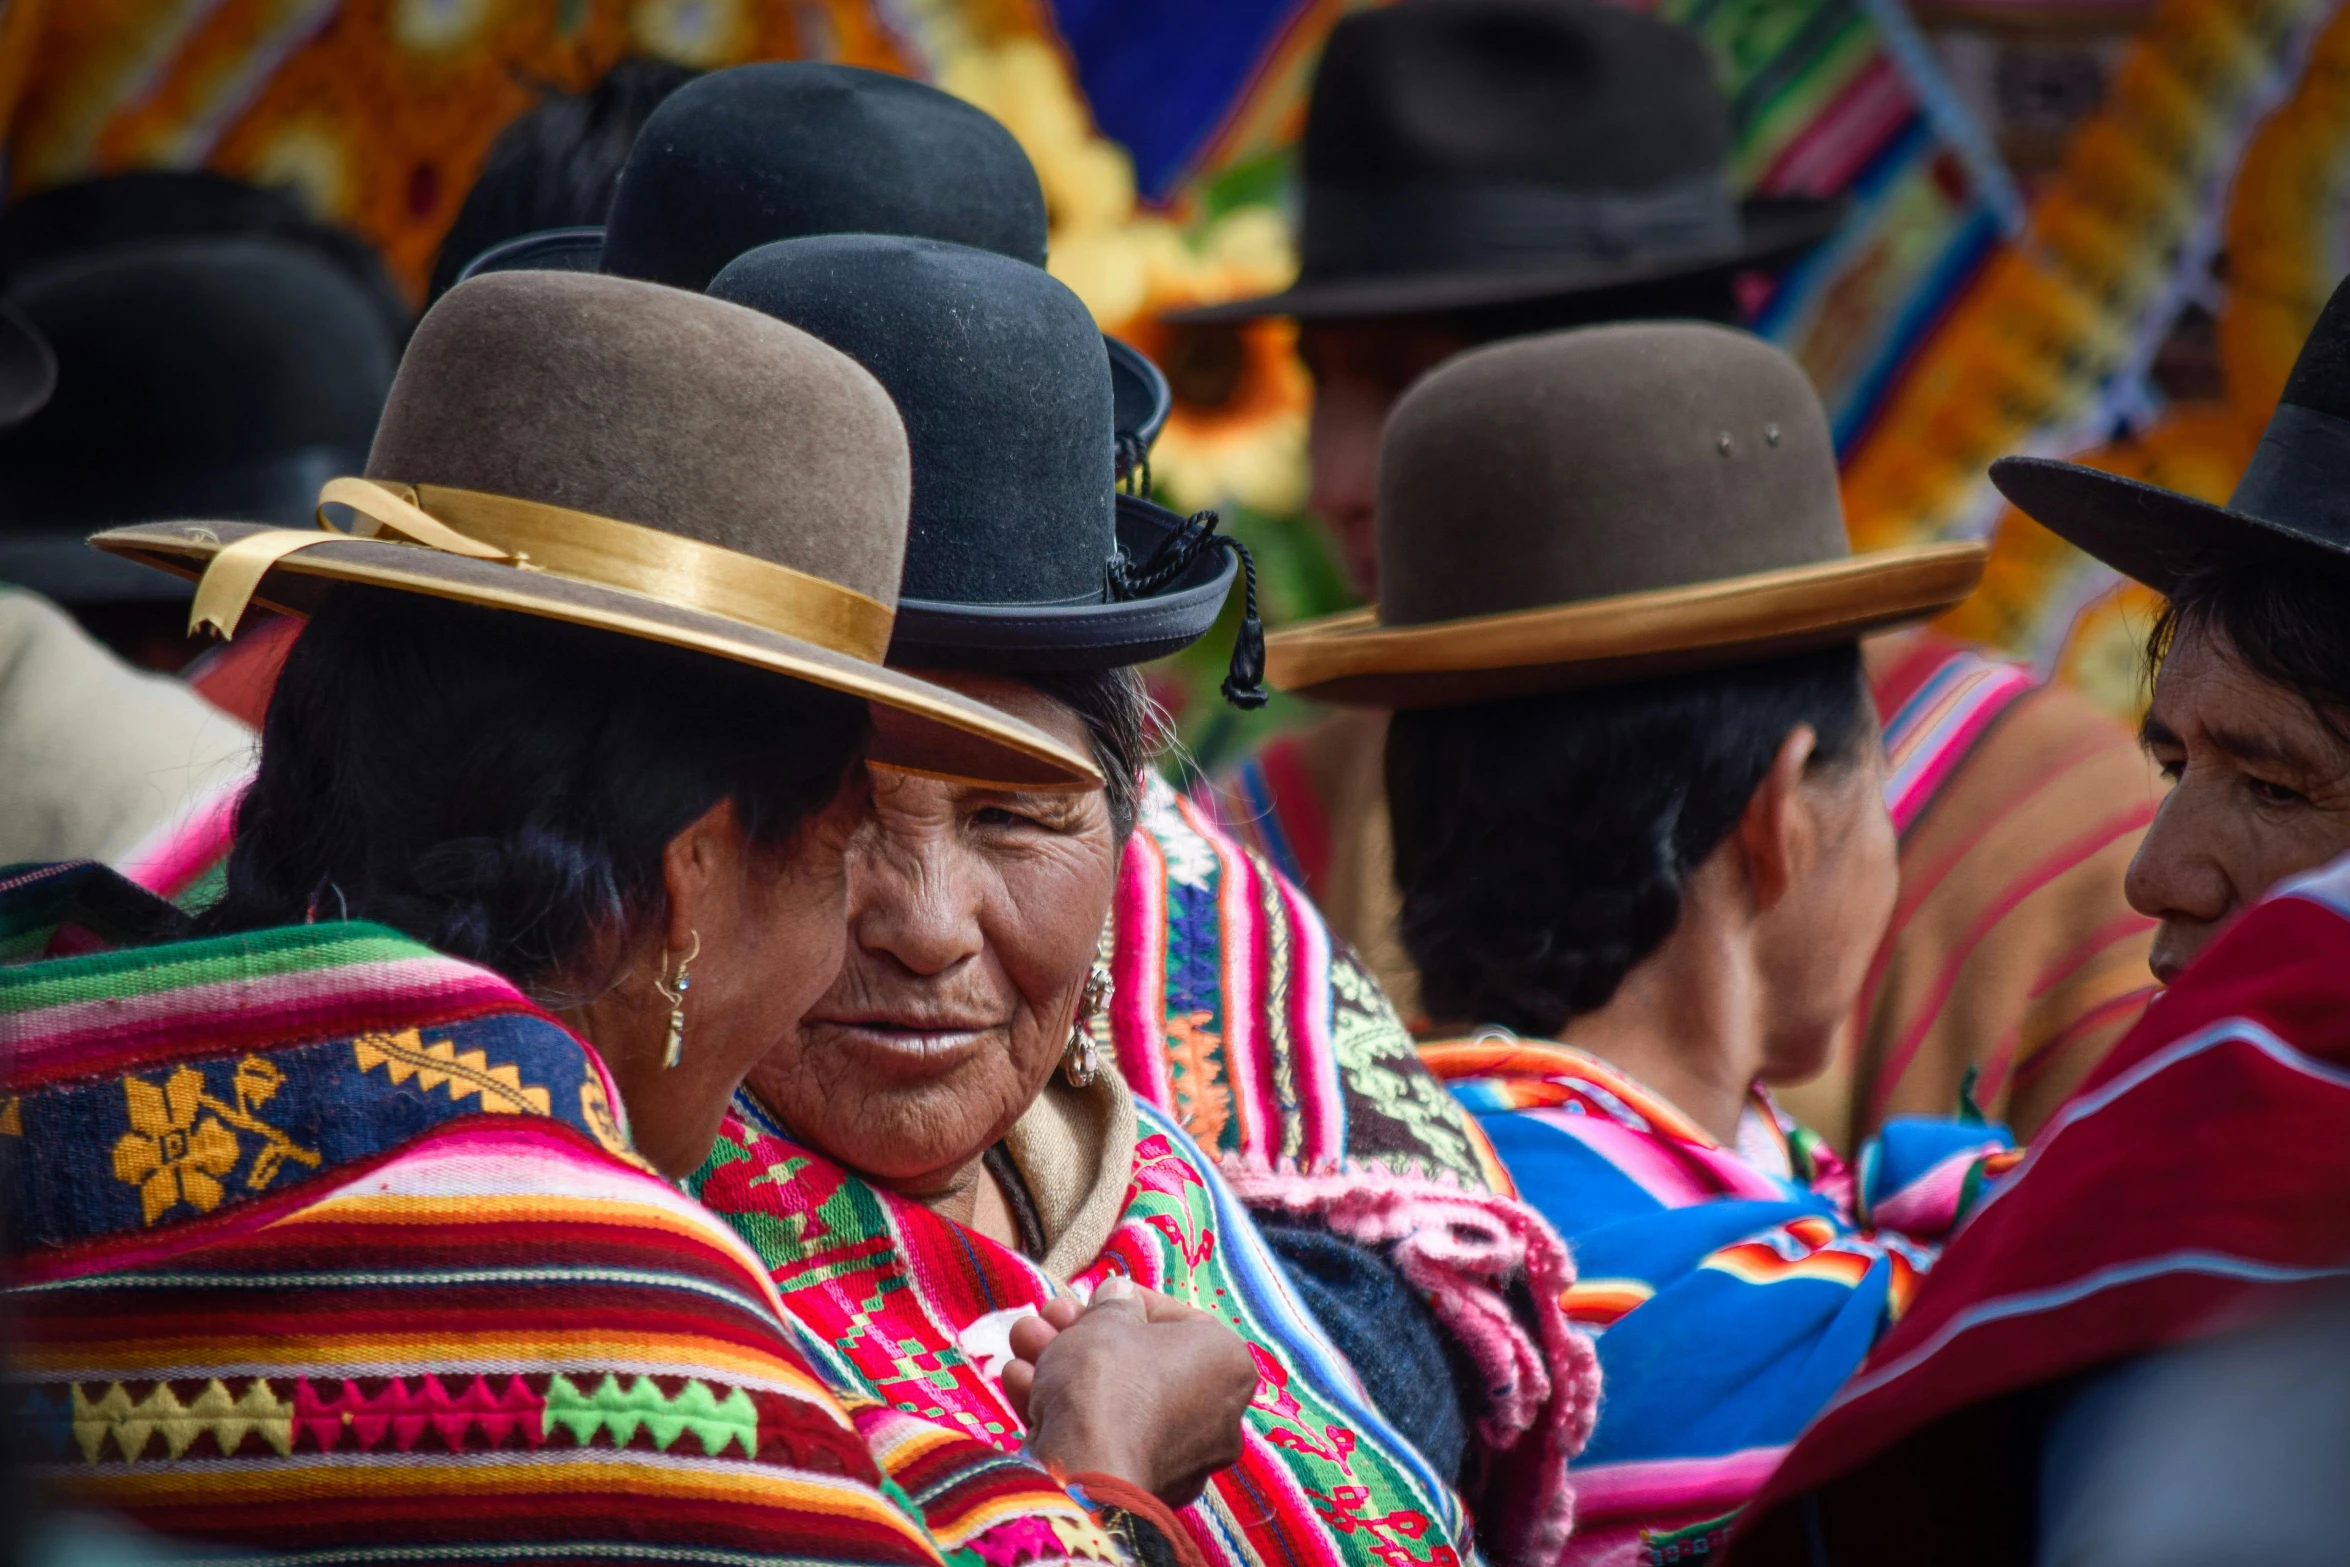 women with colorful clothing and hats and headdress in the background